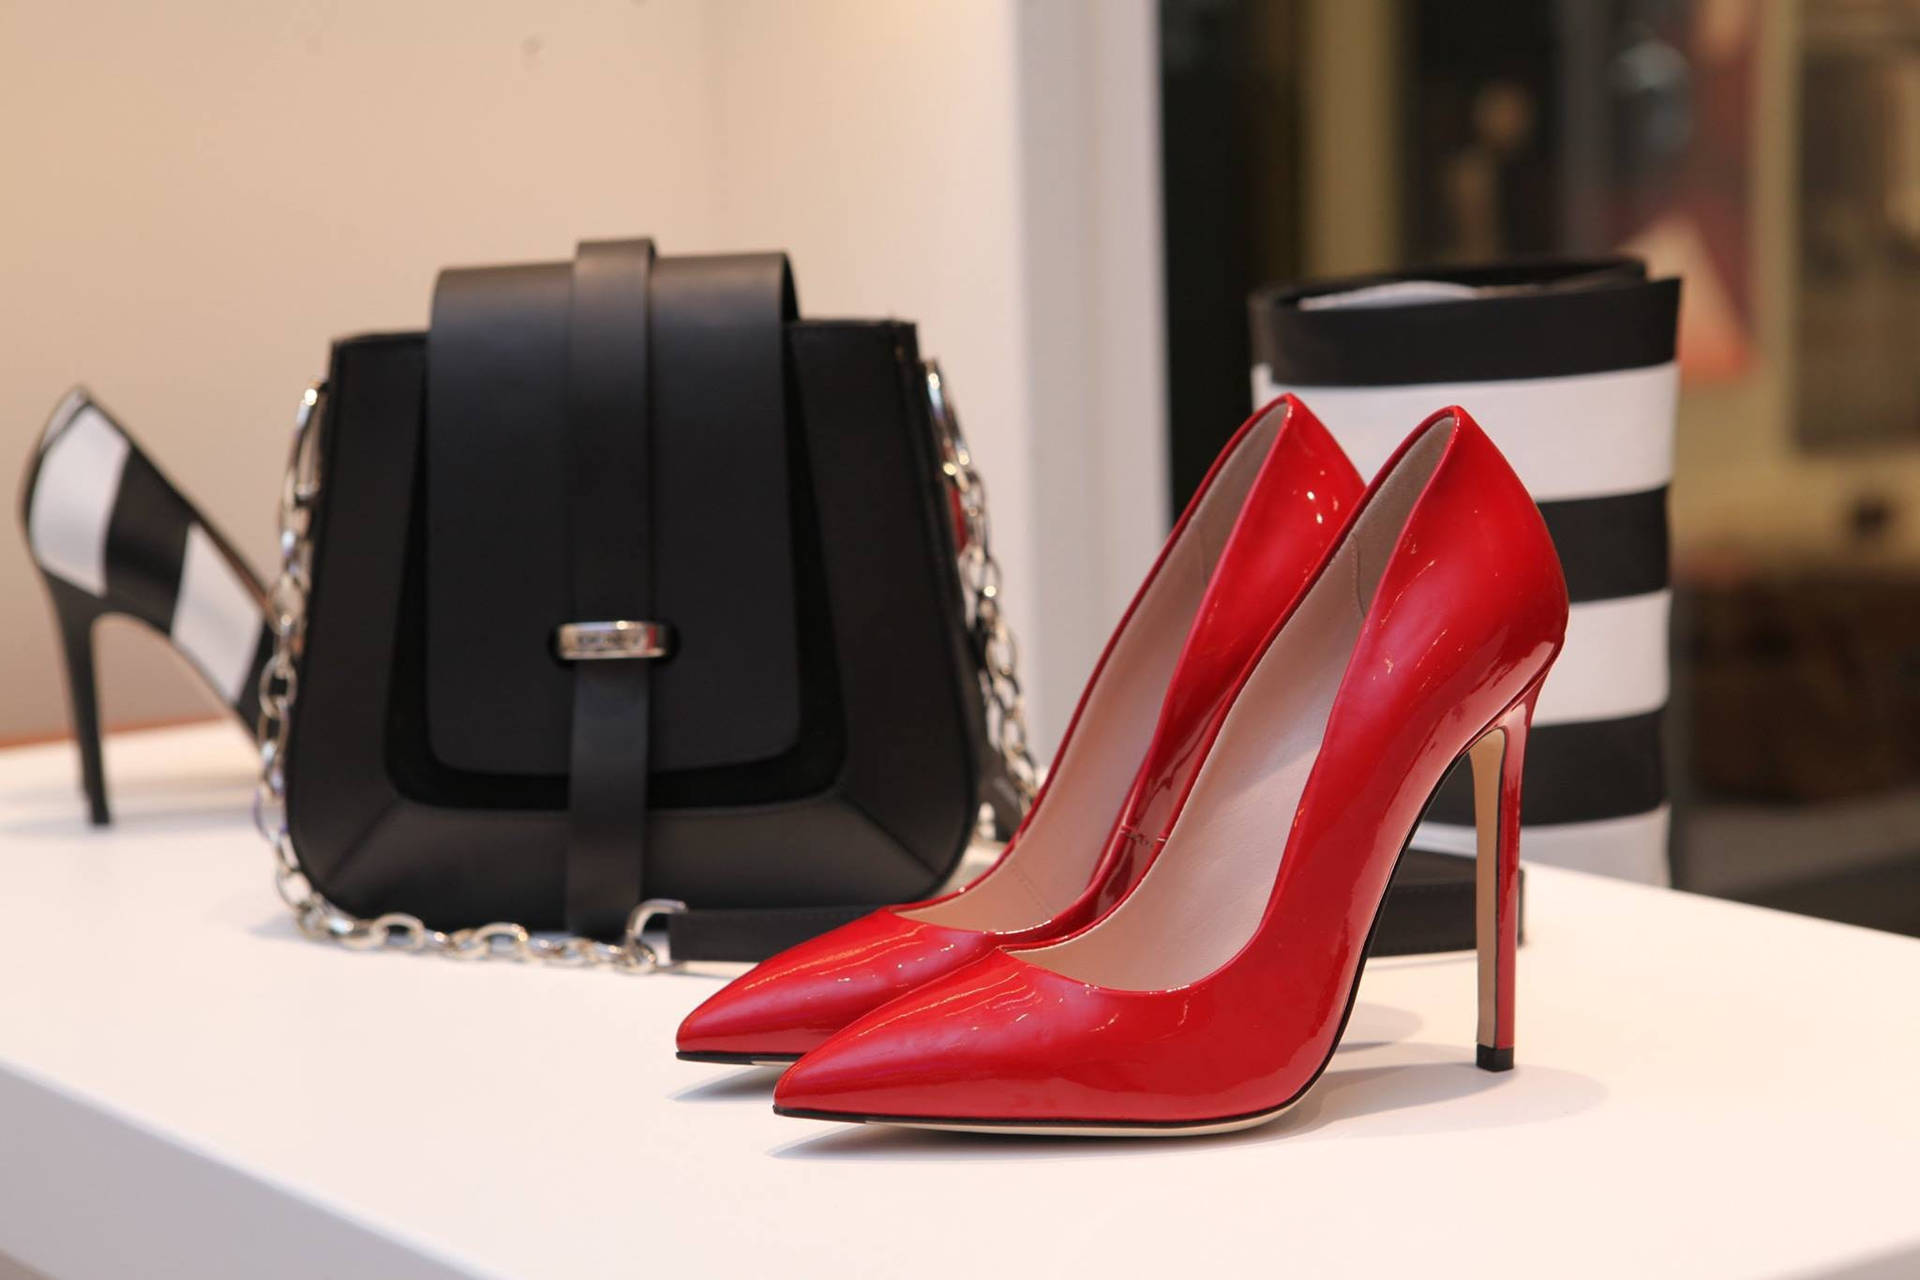 Stunning Red High-heel Shoes